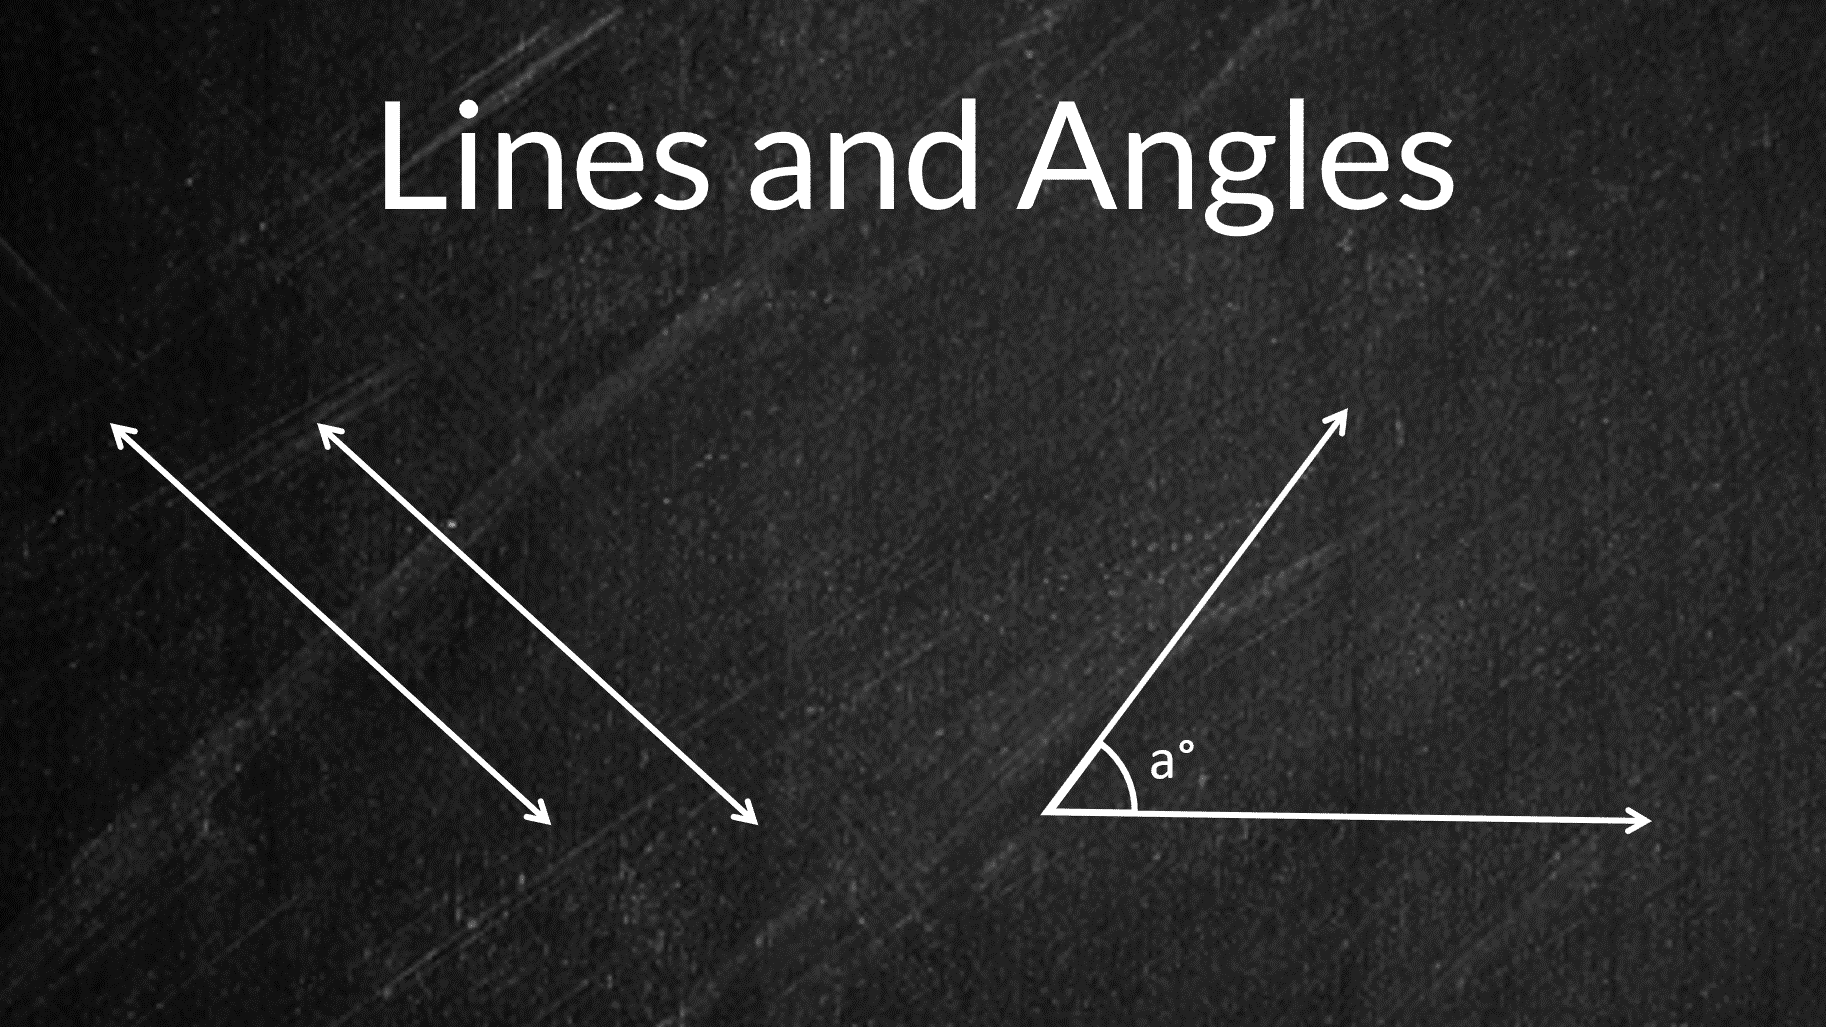 inscribed angles - Year 1 - Quizizz